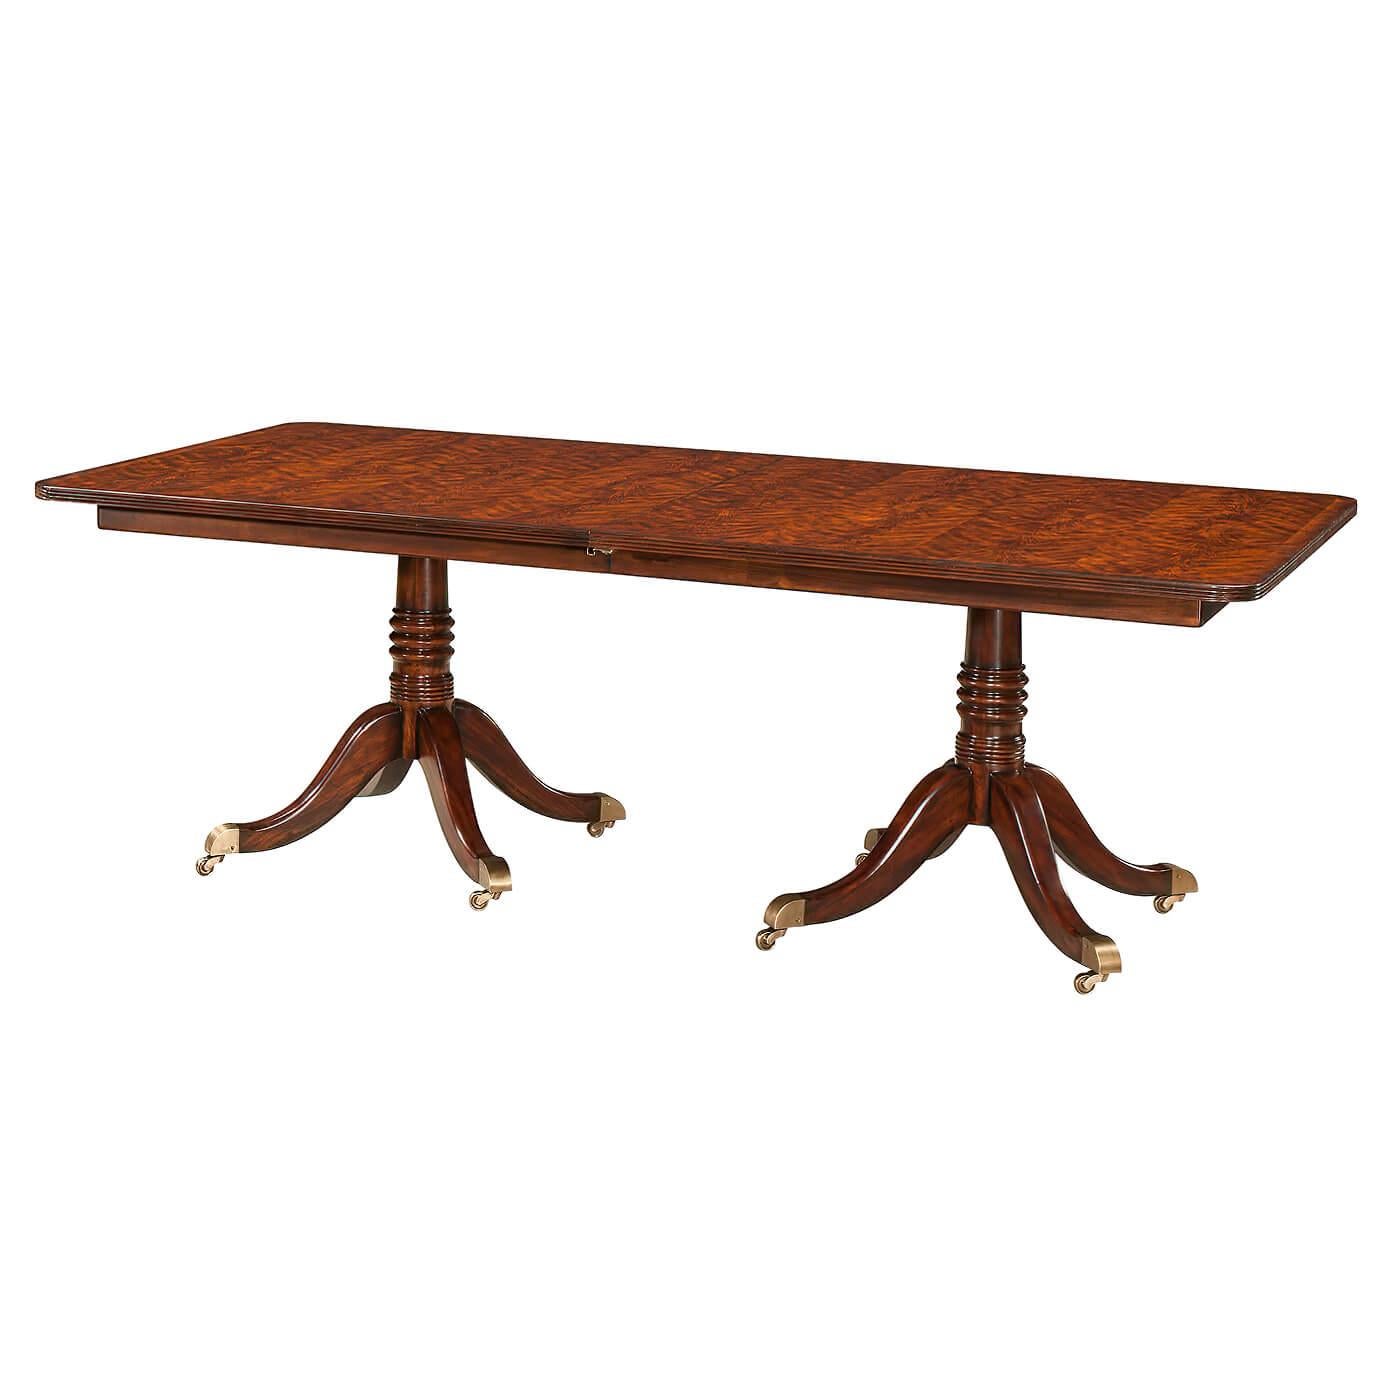 A mahogany veneer and solid twin pedestal extending dining table, the crossbanded reeded edge top with rounded corners opening to accommodate a matching leaf, above a banded frieze on two gun barrel turned columns each terminating in four downswept